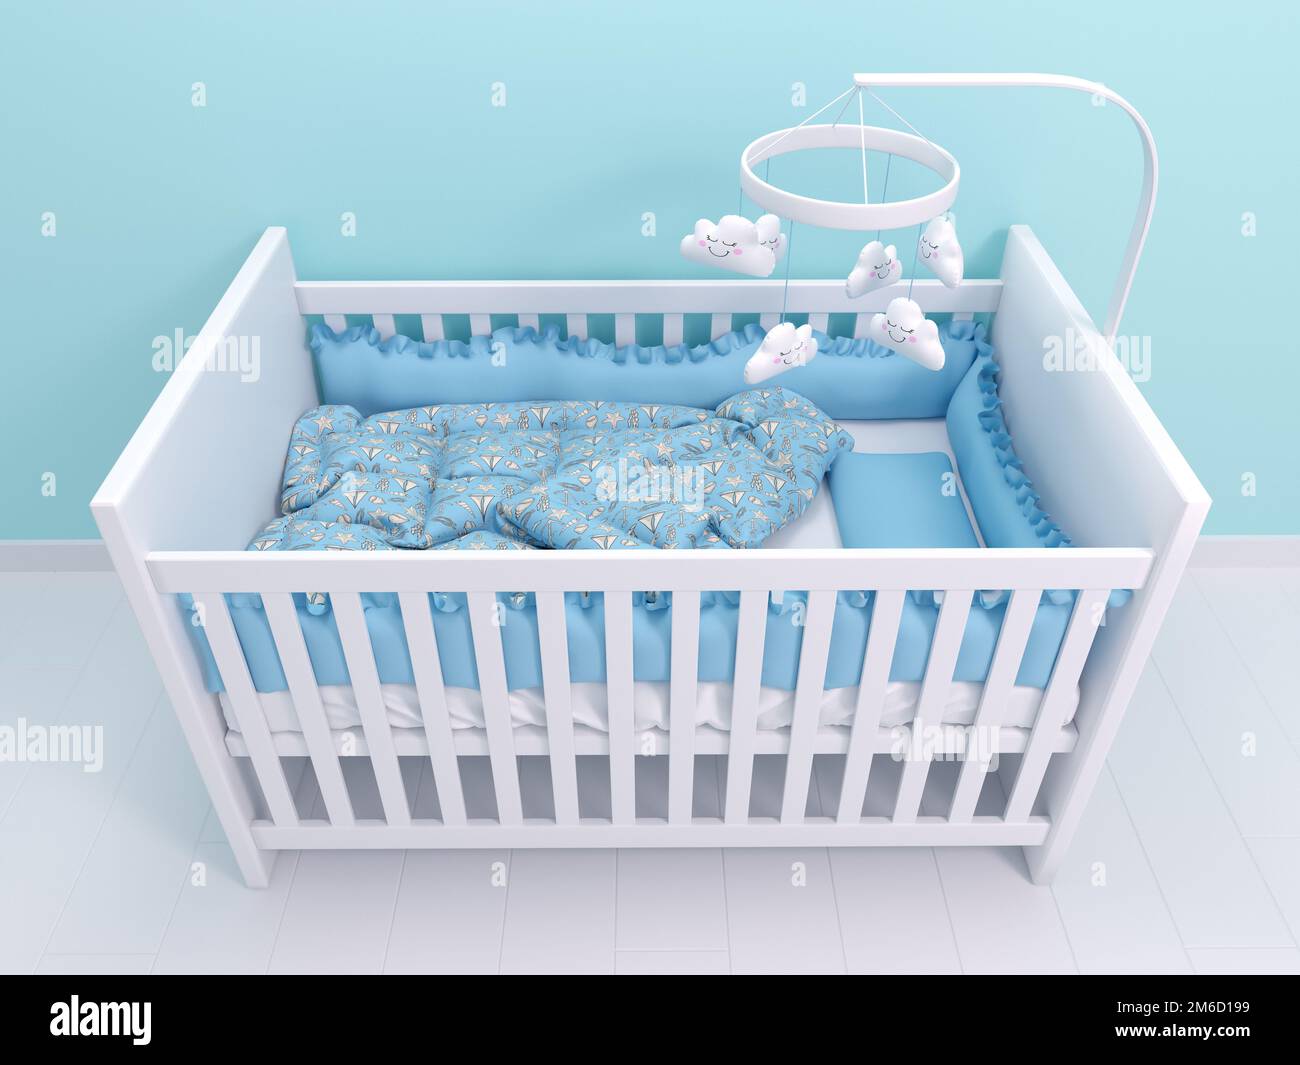 Image of white baby cot with decor Stock Photo